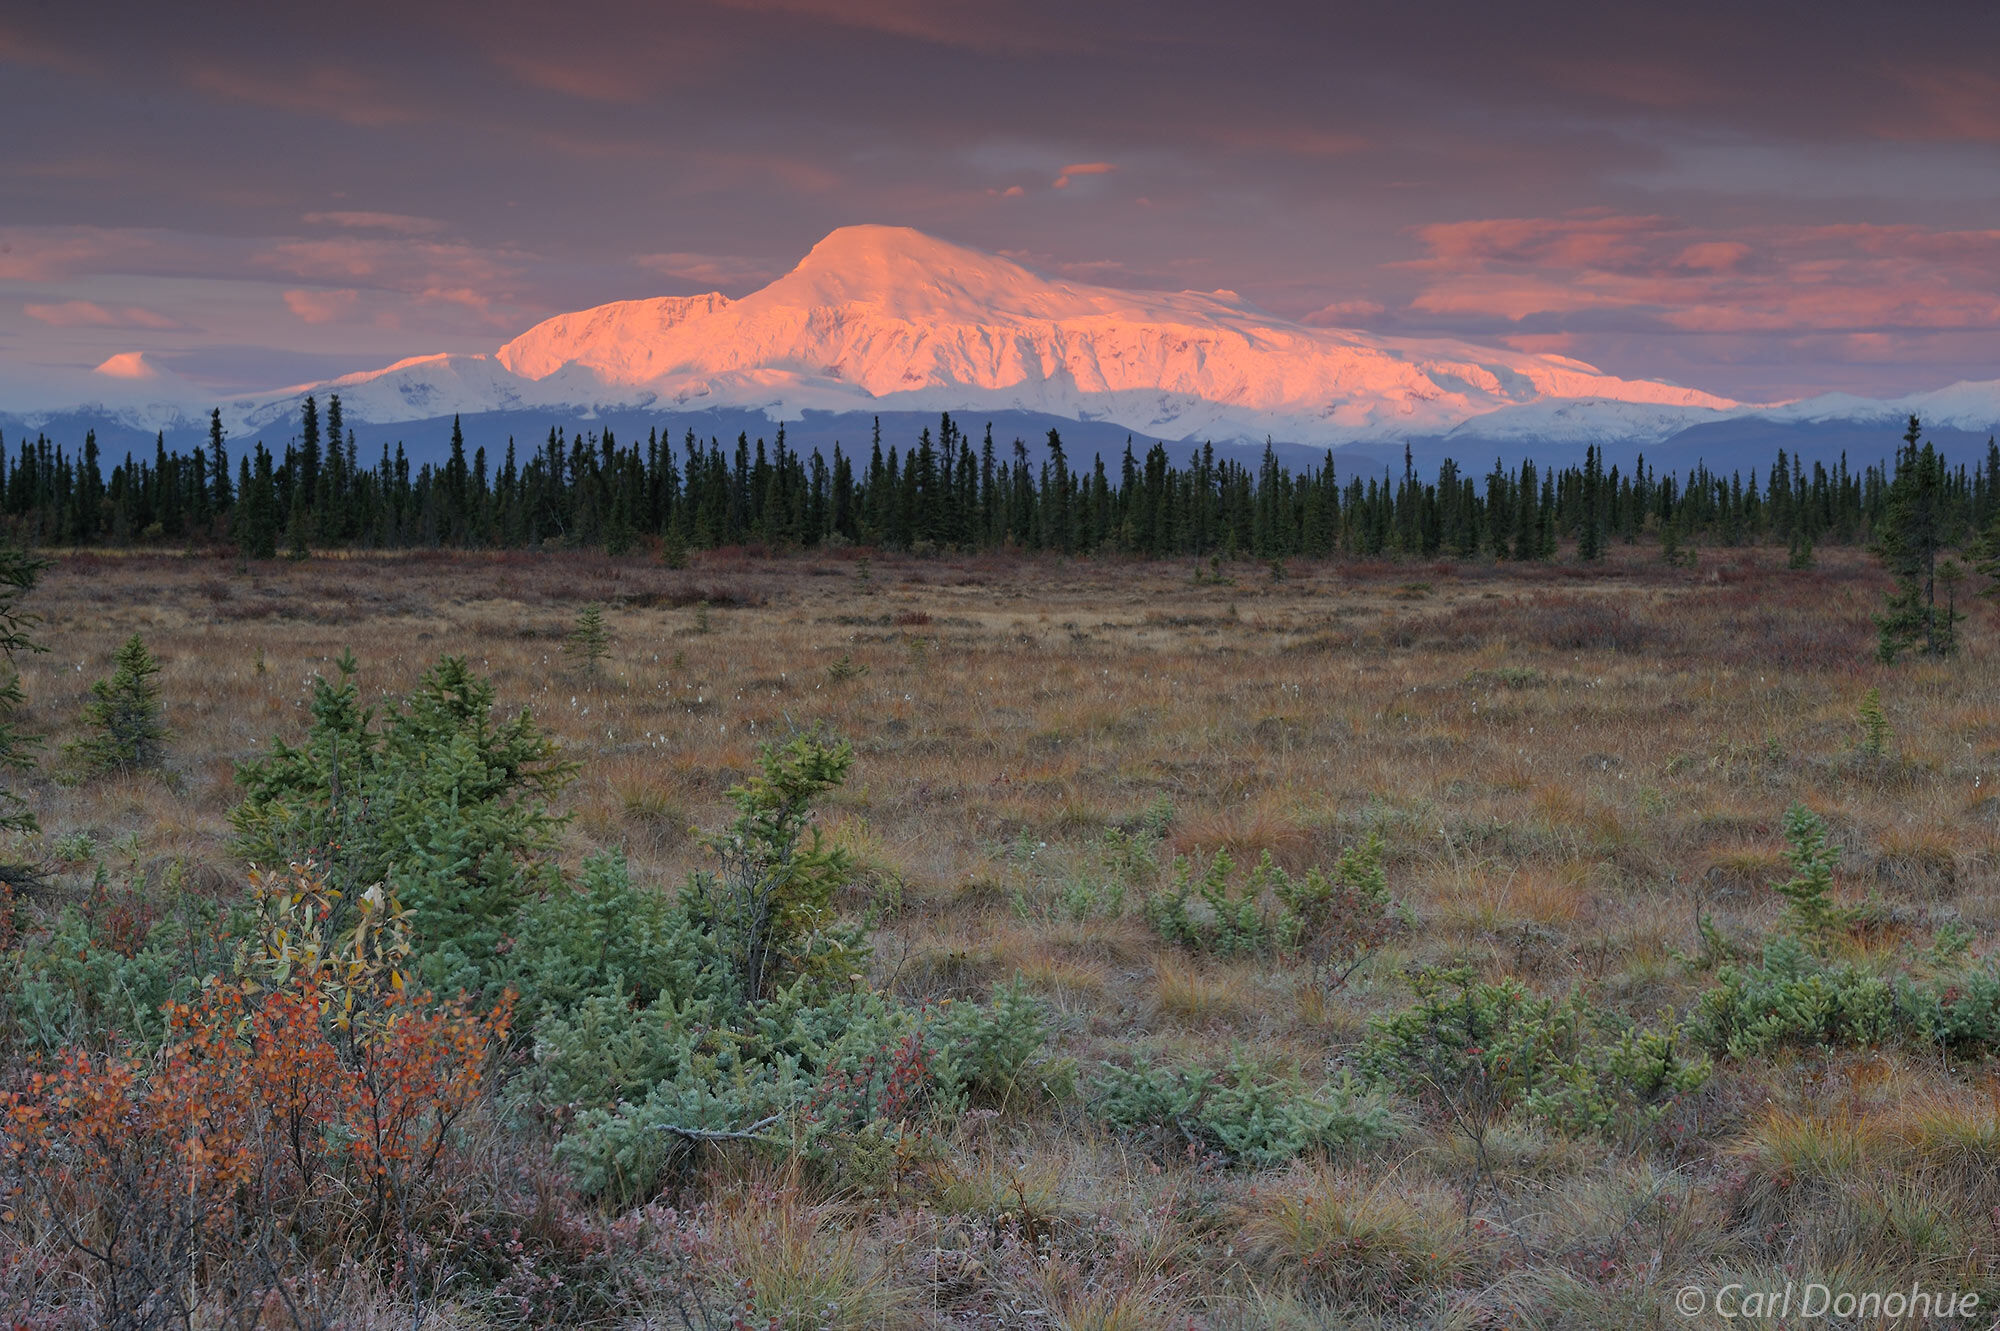 A bold and dramatic sunrise over Mt. Sanford, fall foliage in the tundra, and boreal forest in the foreground, Wrangell-St. Elias...